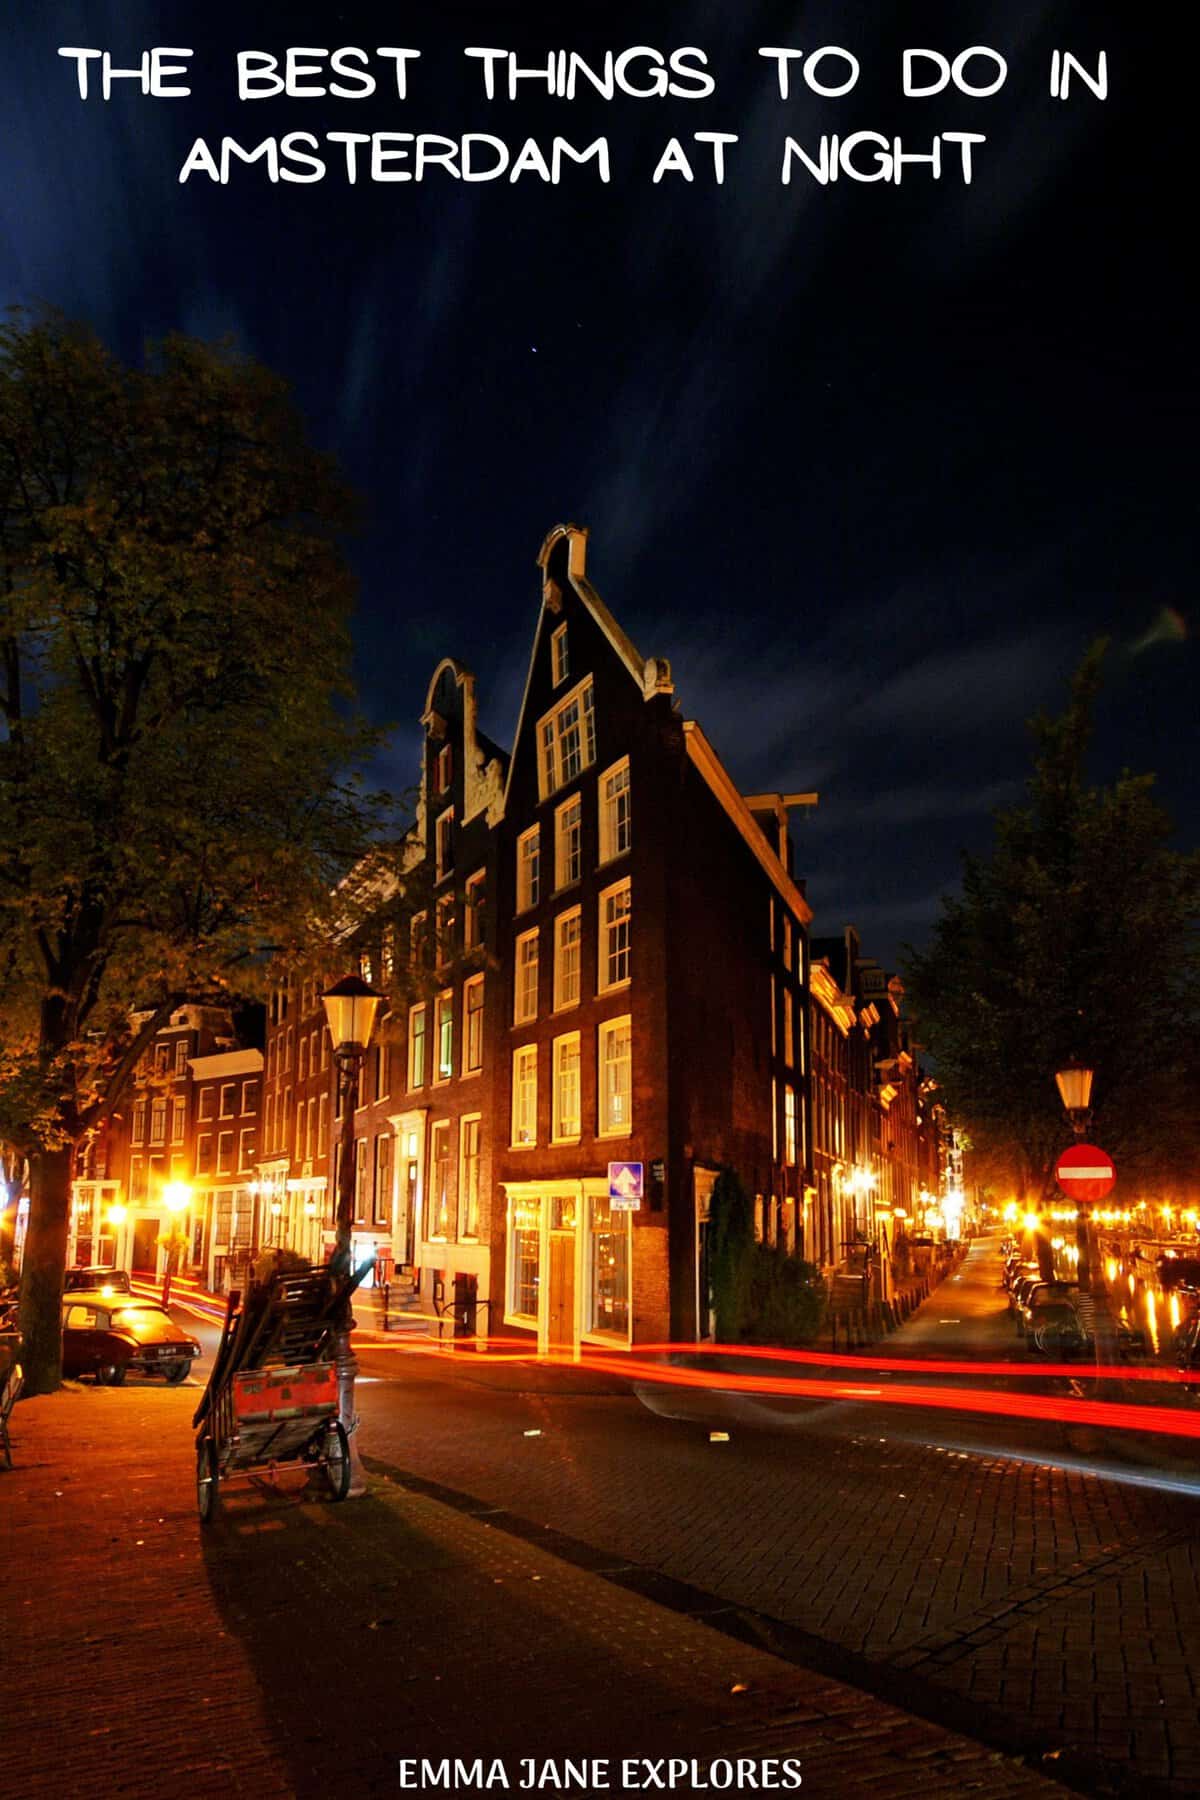 Things To Do In Amsterdam At Night - Emma Jane Explores